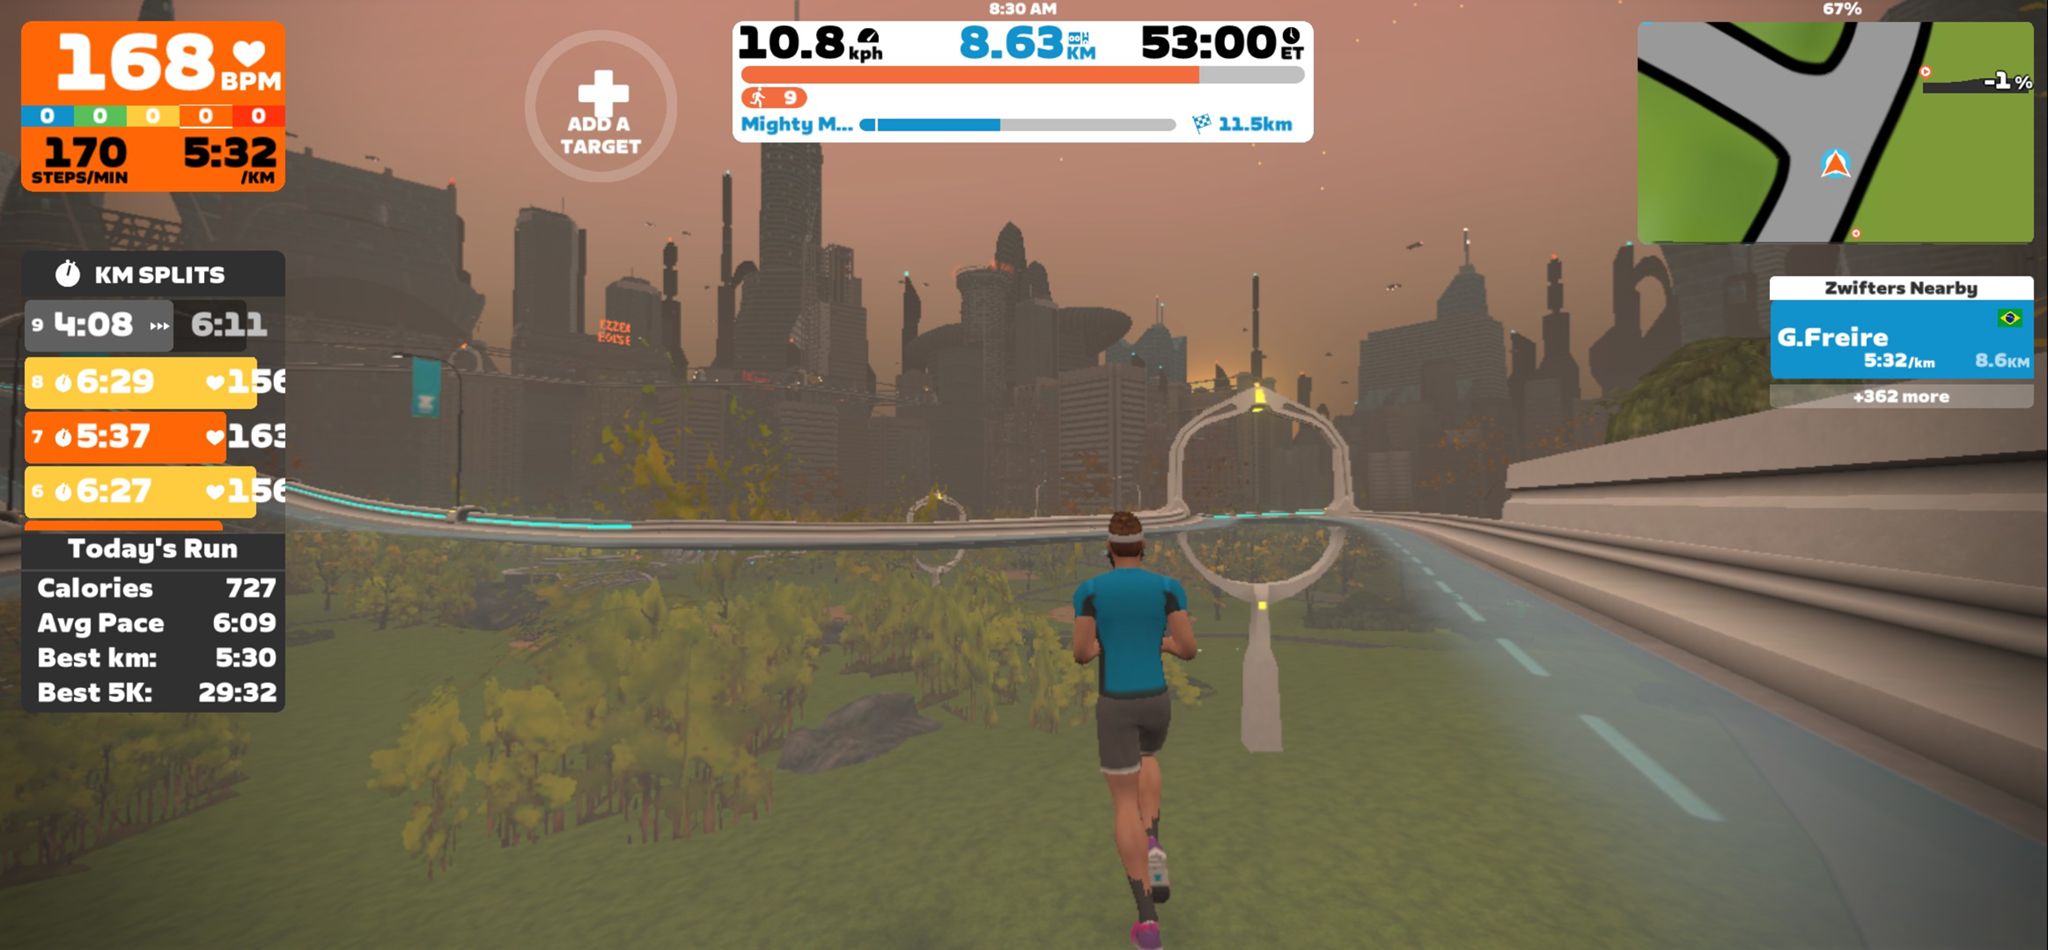 Maximizing Your Indoor Workouts with Zwift: How I’m Using it with Garmin Fenix 6 and Stryd for Accurate Treadmill Training